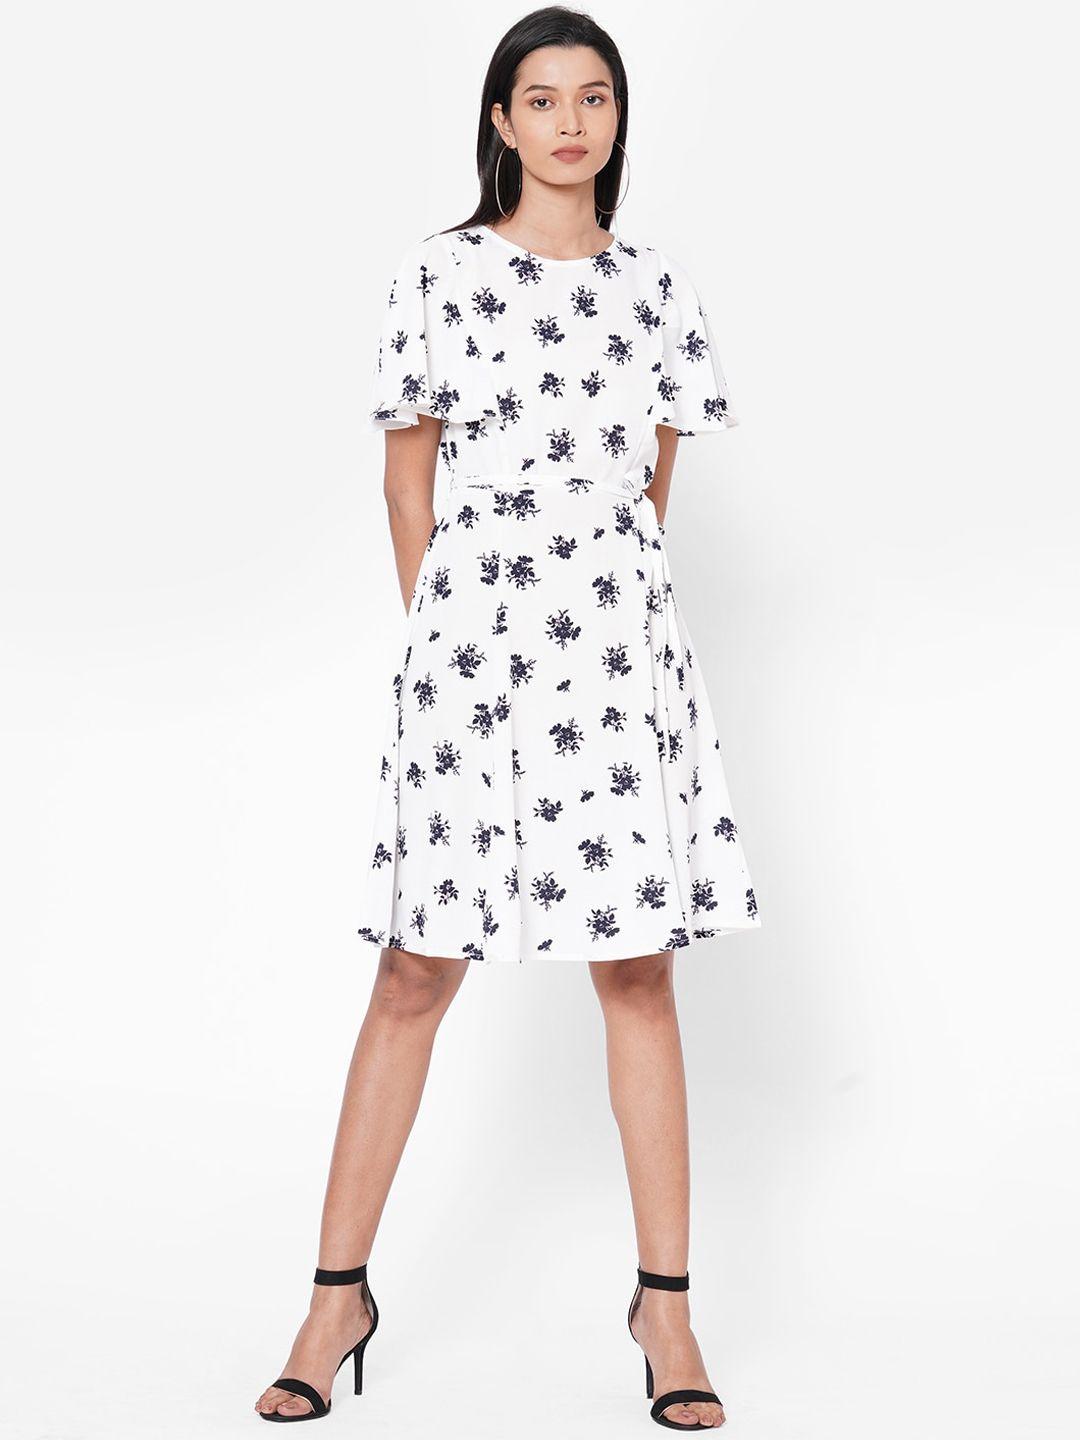 109f-women-white-&-navy-blue-floral-printed-fit-and-flare-dress